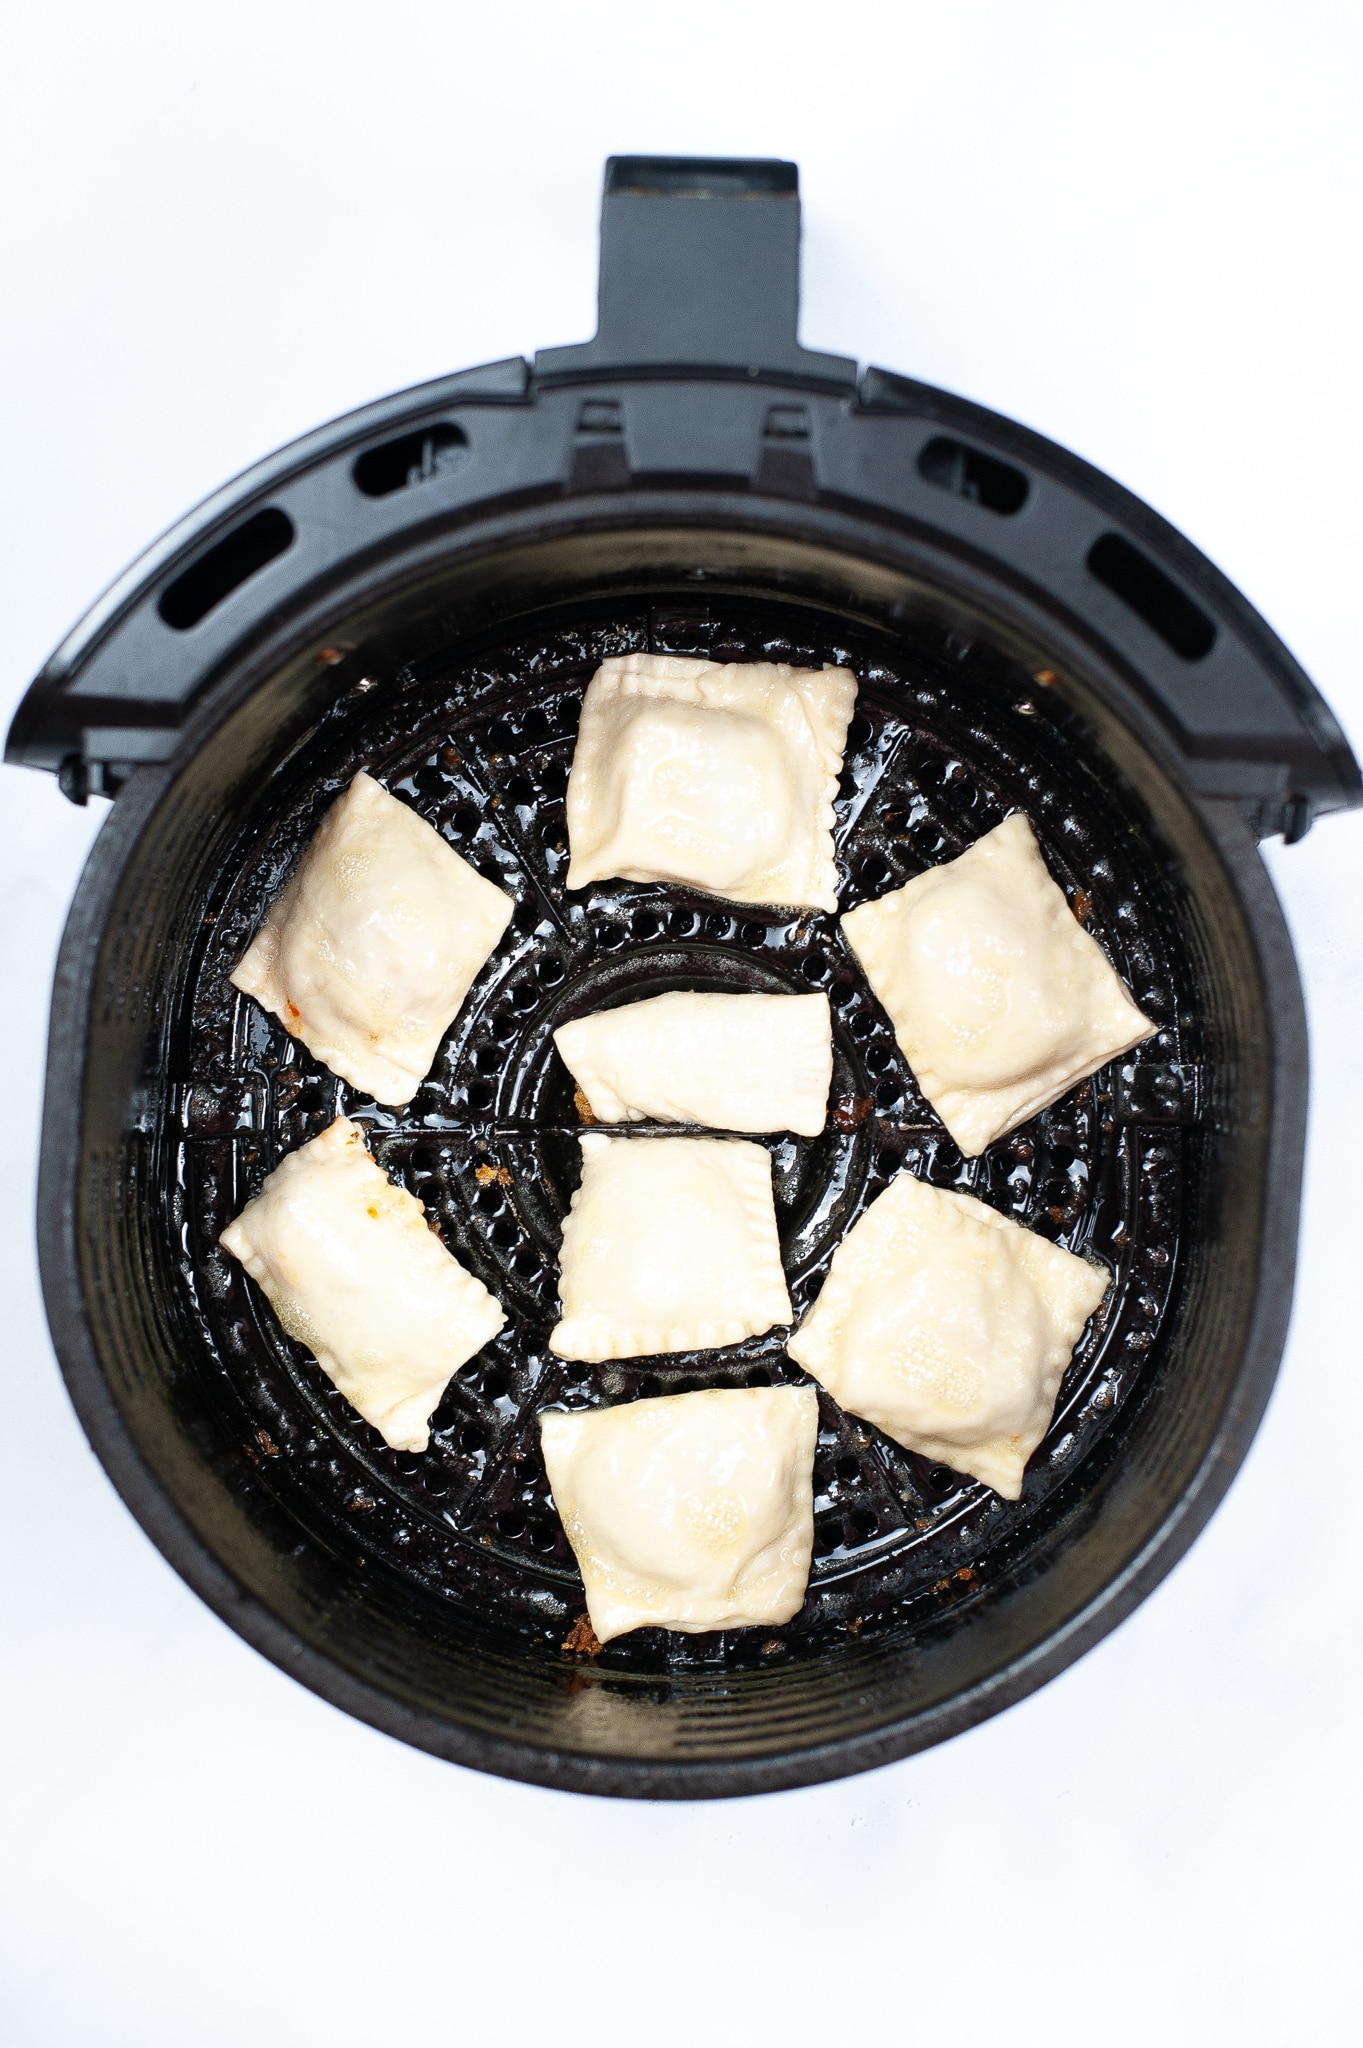 Pizza rolls inside the air fryer ready to be cooked